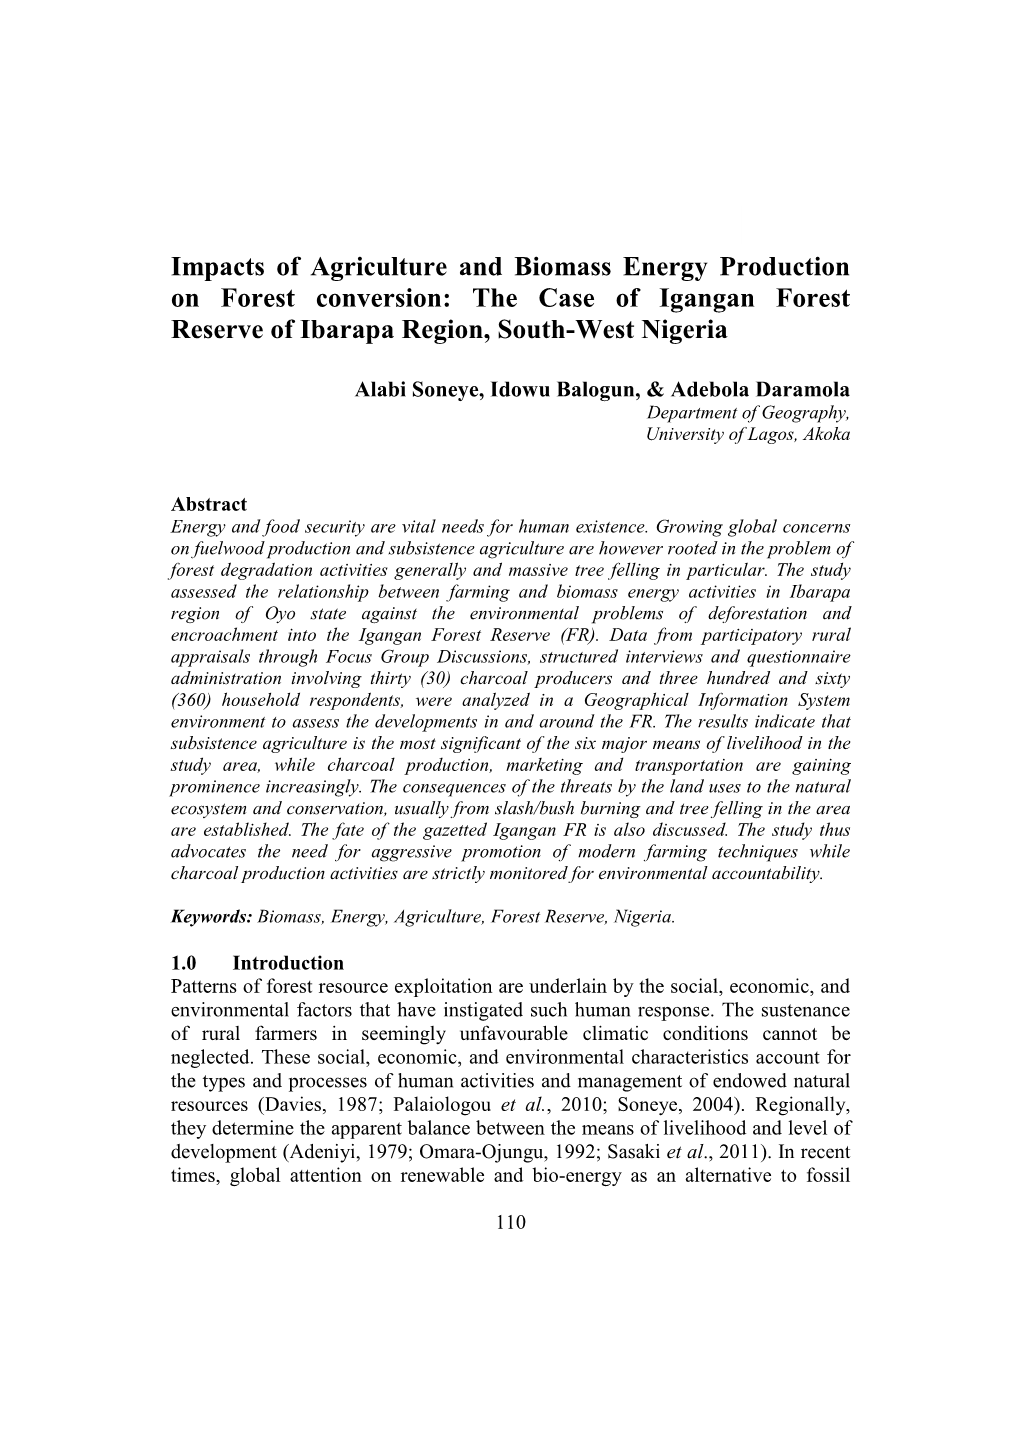 Impacts of Agriculture and Biomass Energy Production on Forest Conversion: the Case of Igangan Forest Reserve of Ibarapa Region, South-West Nigeria